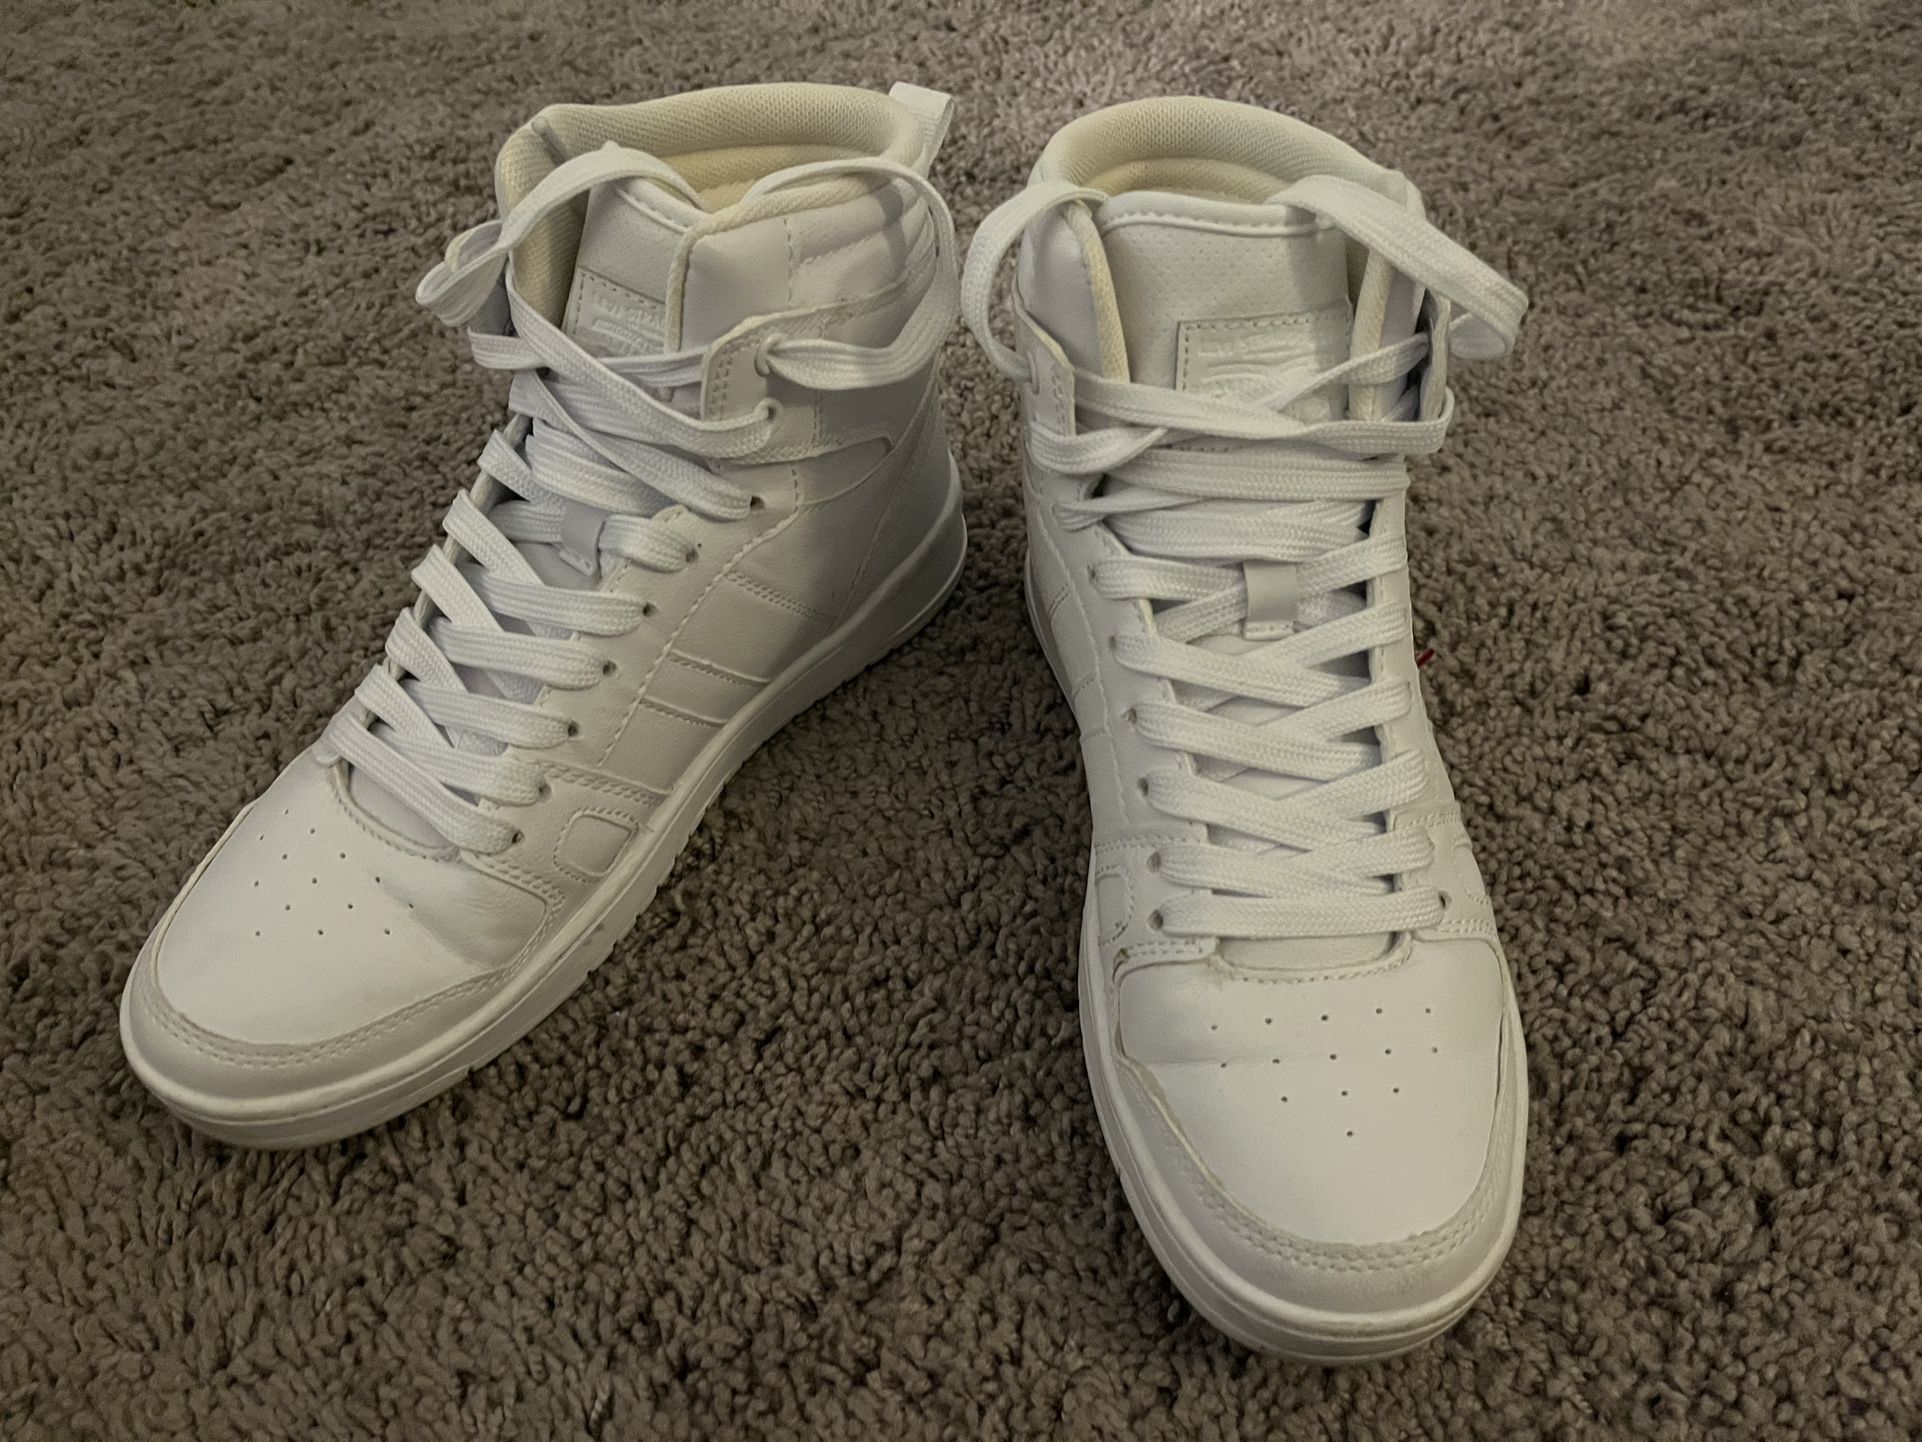 Levi High Tops- Local Pickup Only